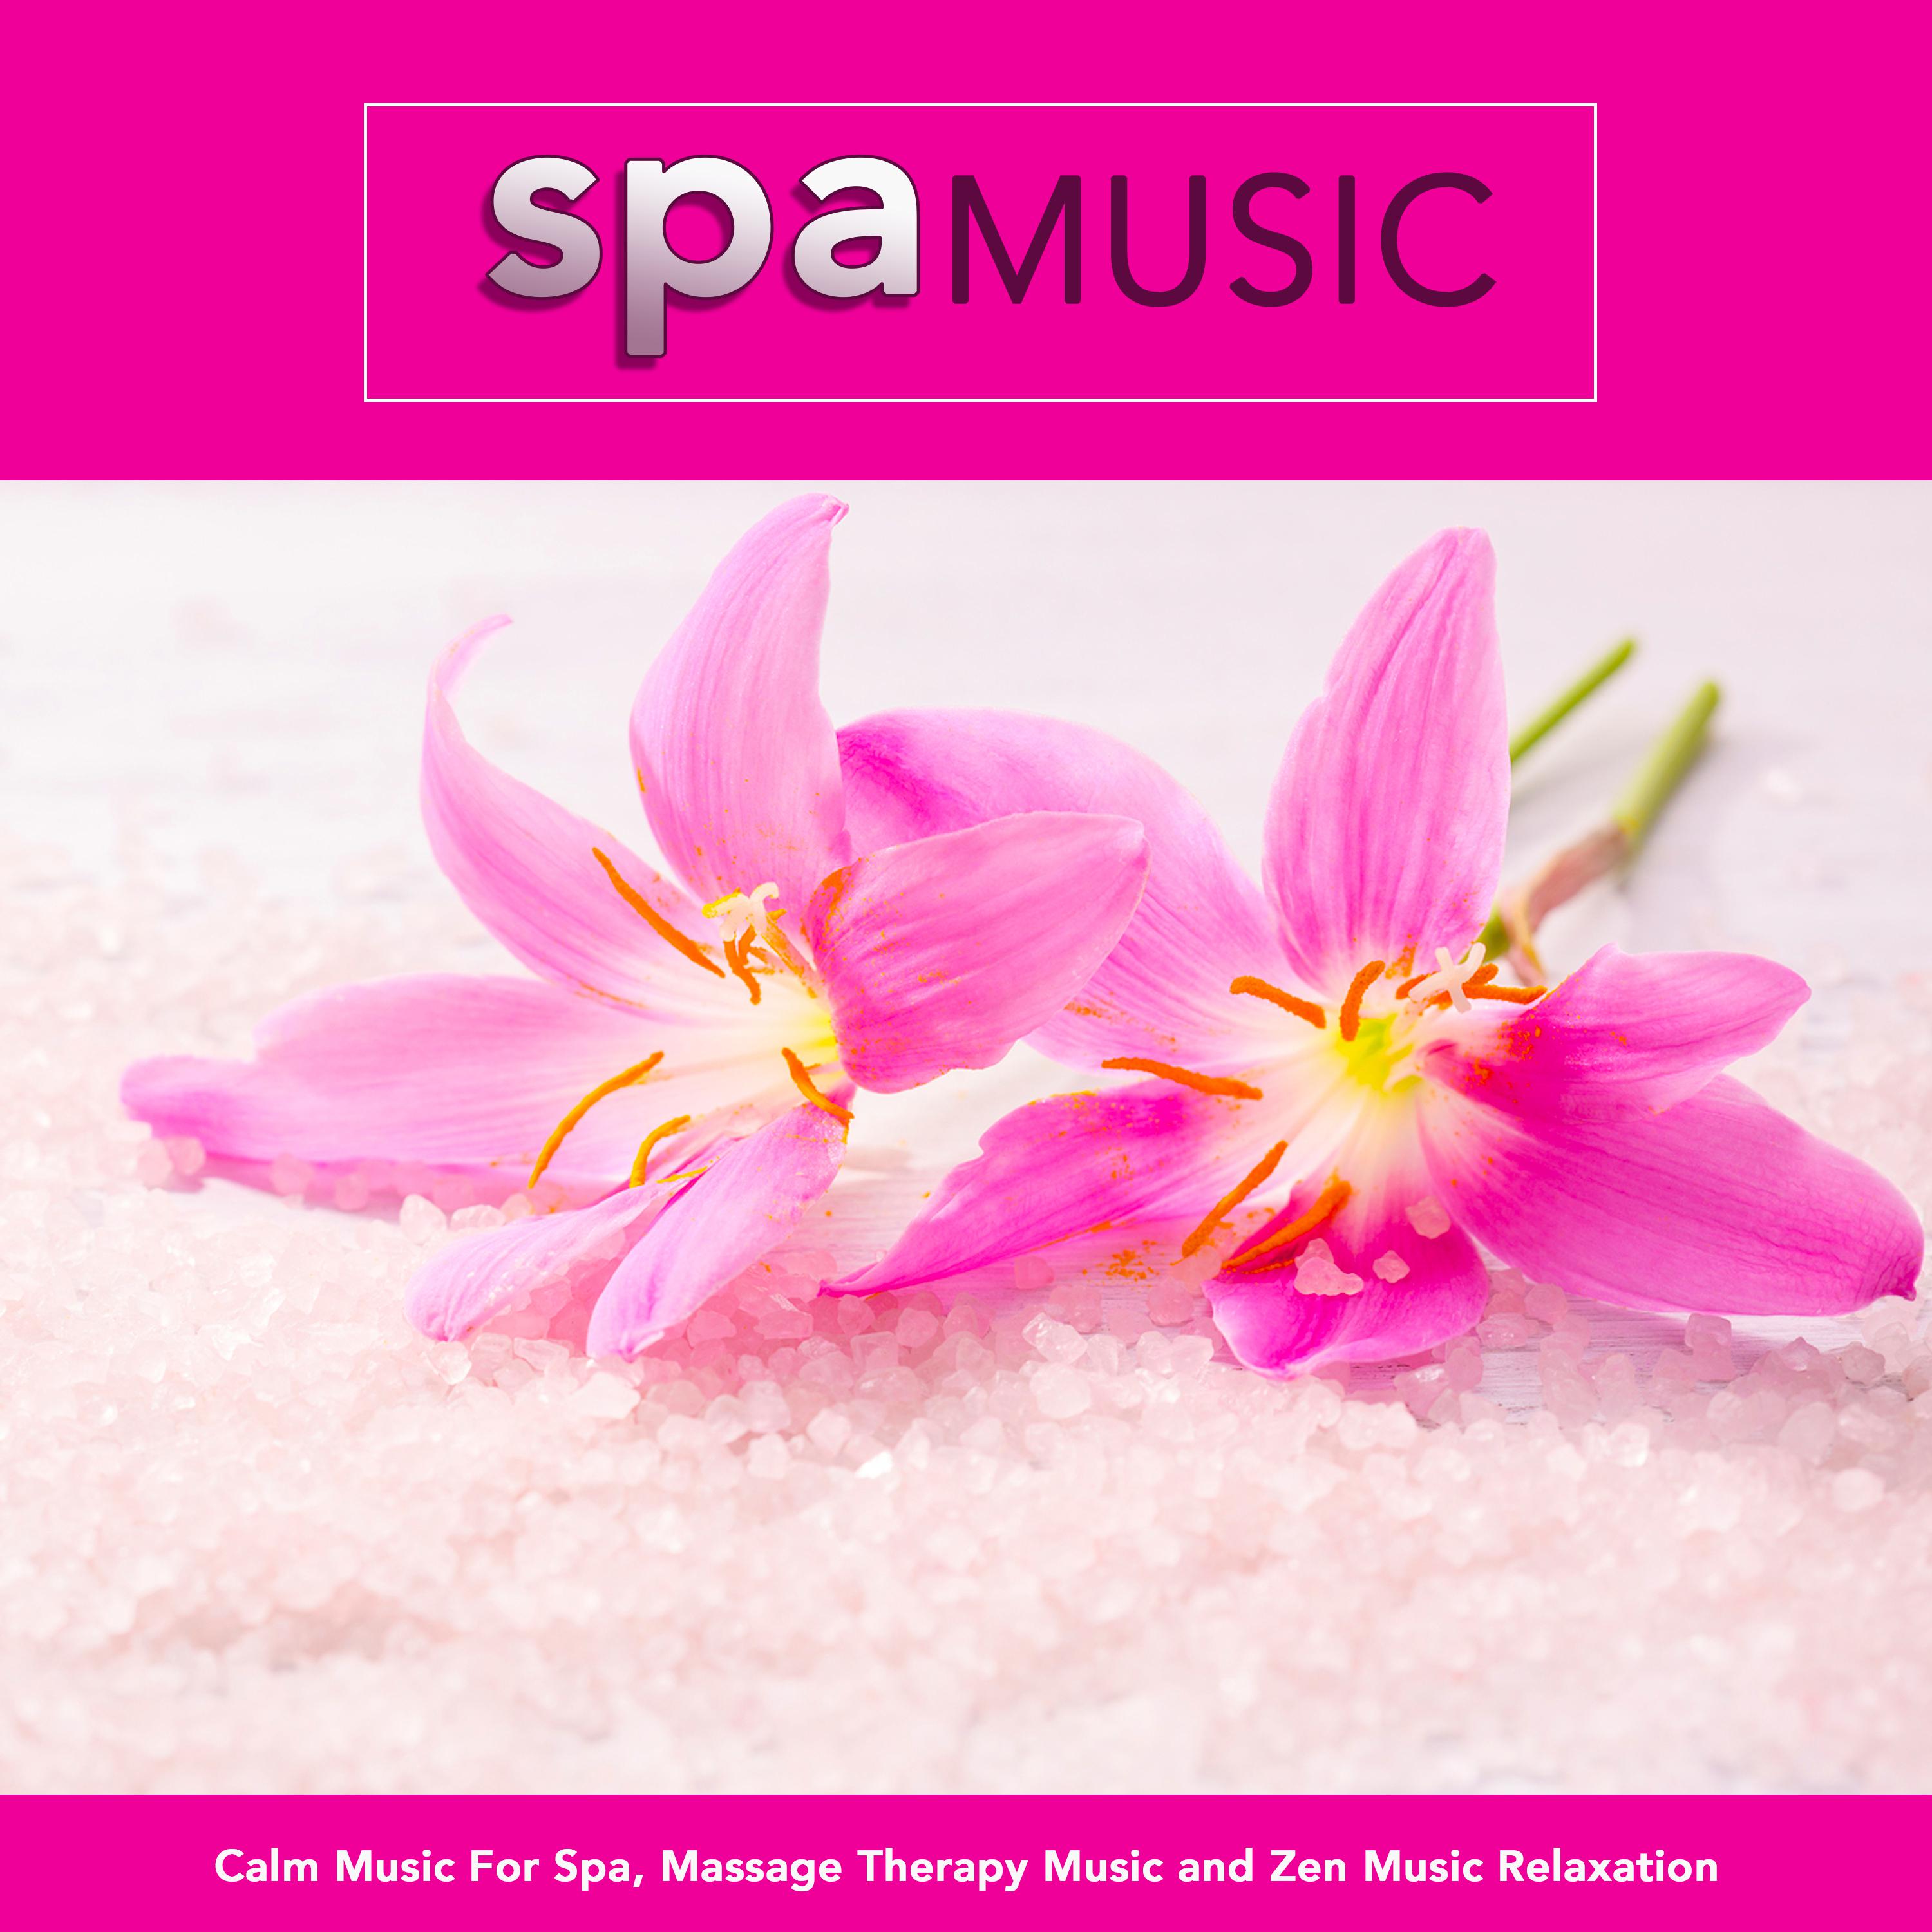 Spa Music: Calm Music For Spa, Massage Therapy Music and Zen Music Relaxation